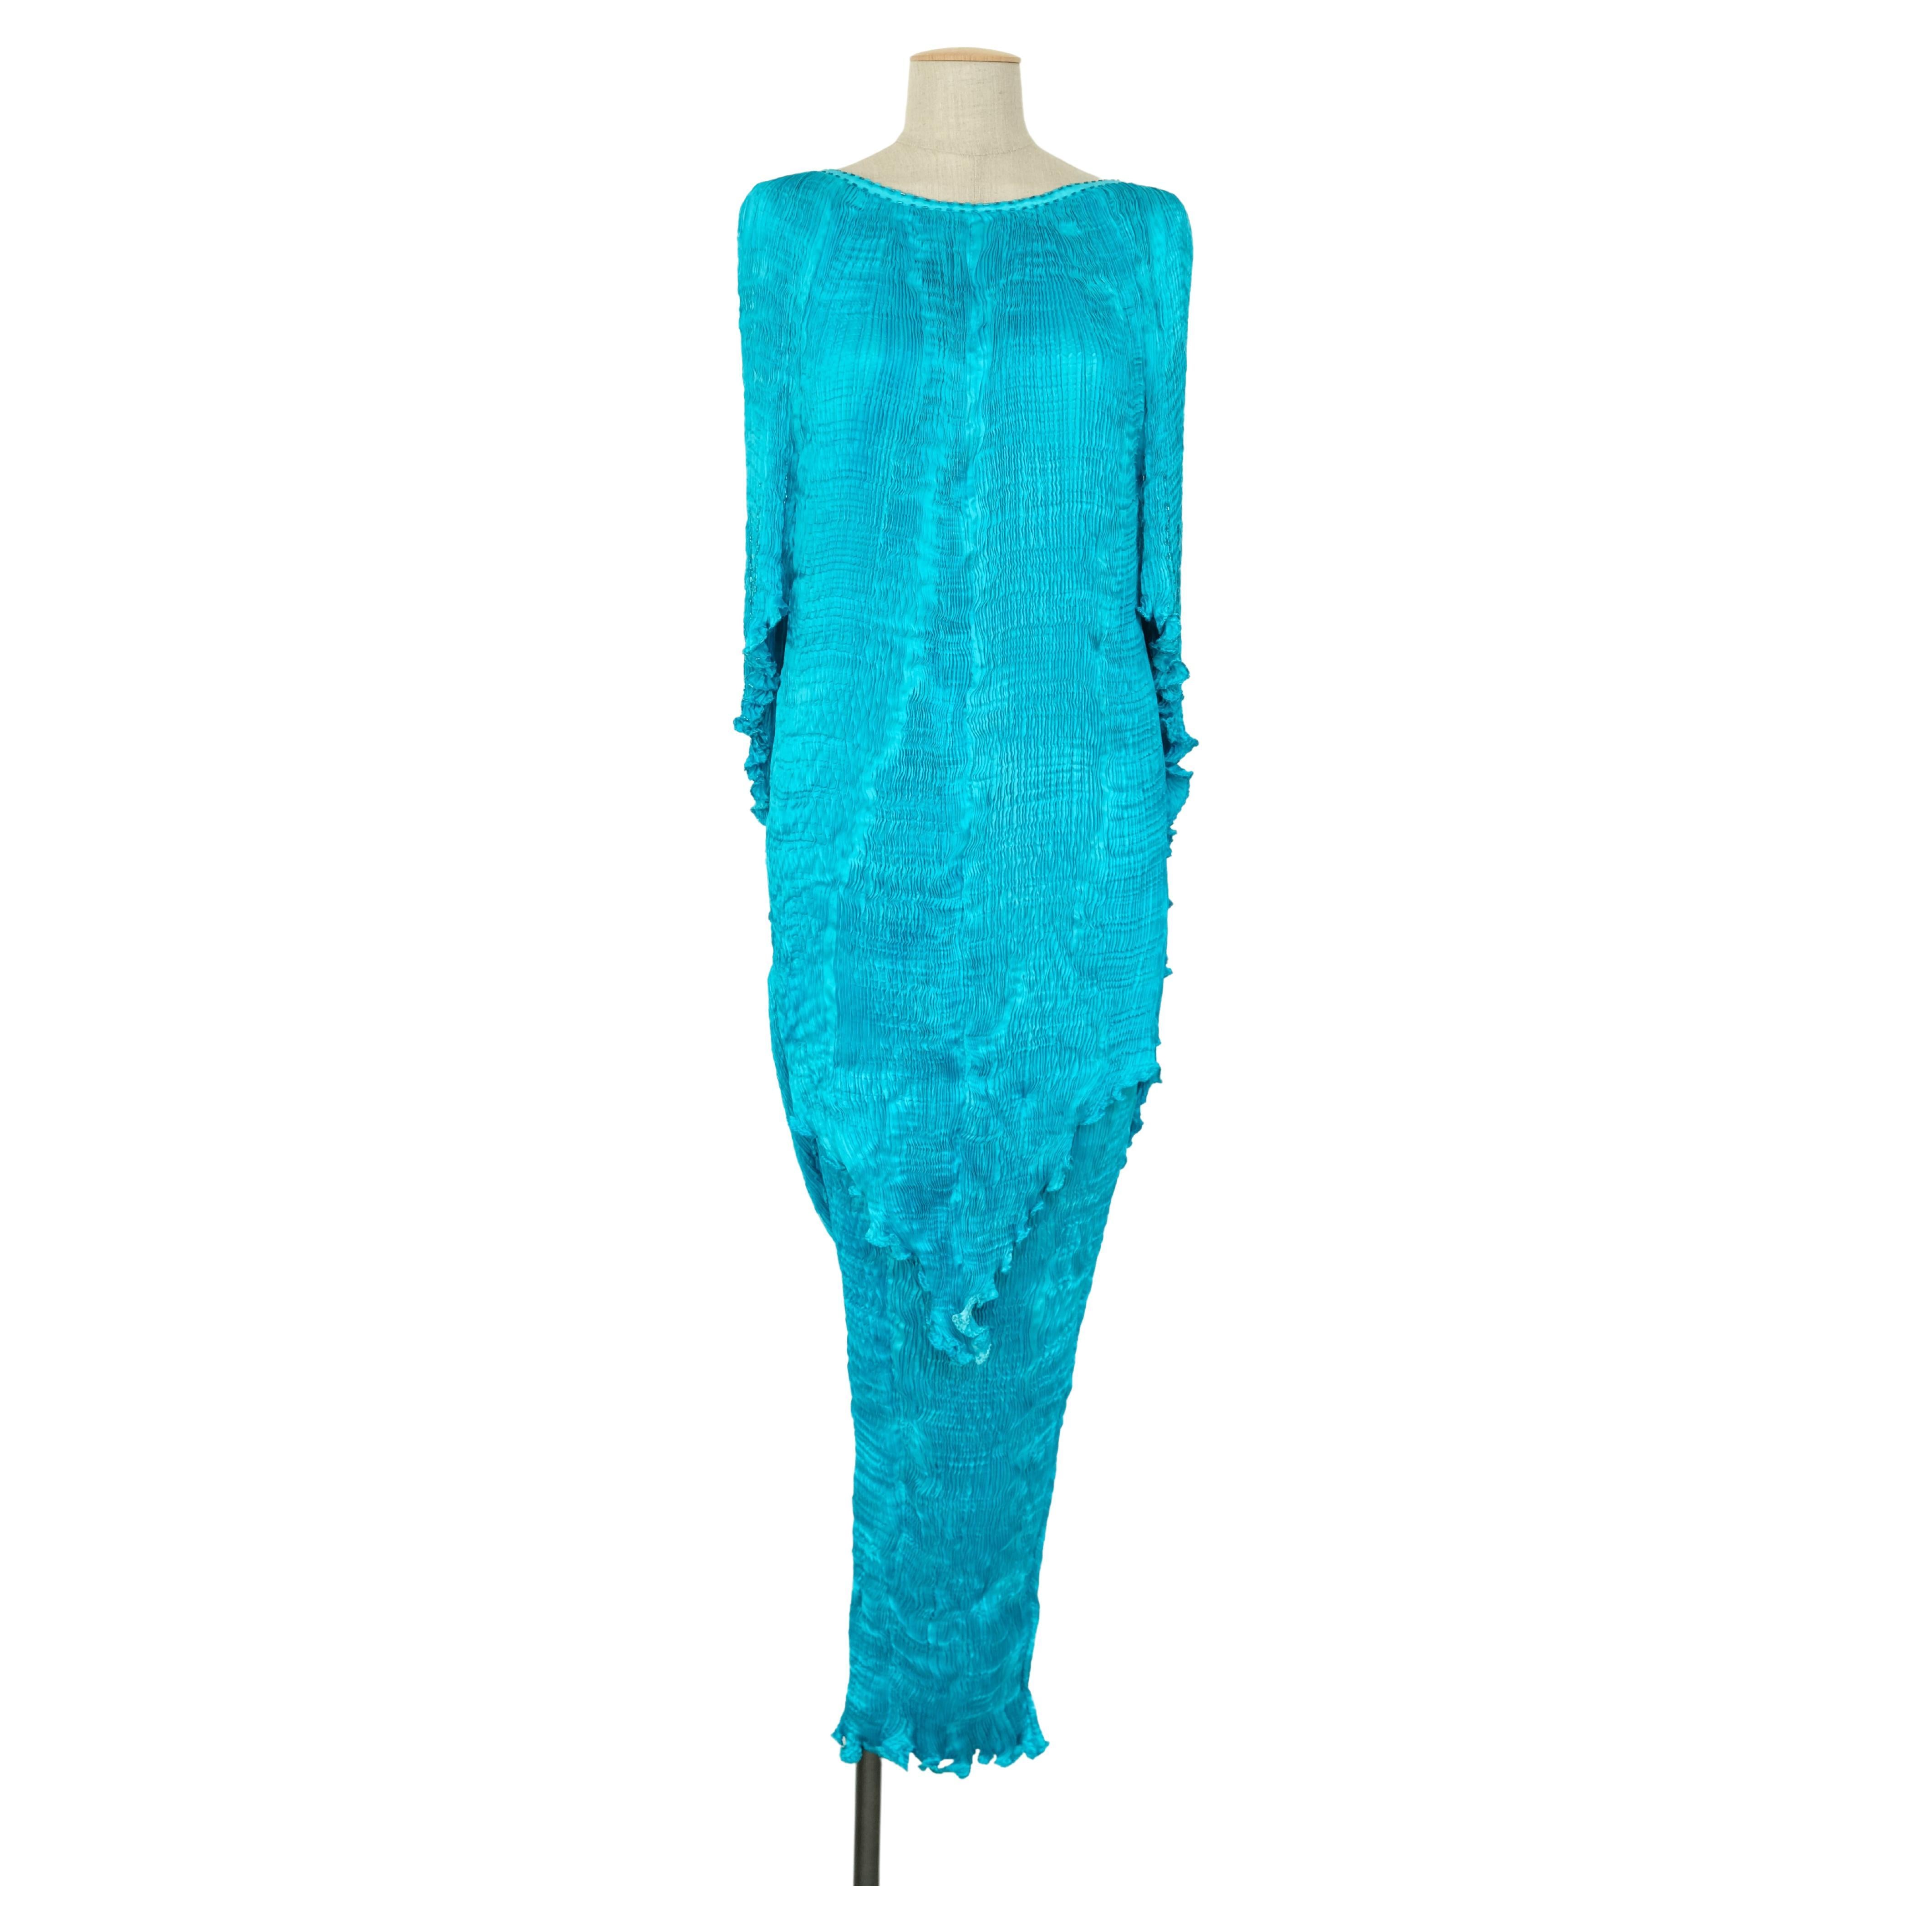 Patricia Lester 'Fortuny' Pleated Hand Made One Of A Kind Turquoise Ensemble 3